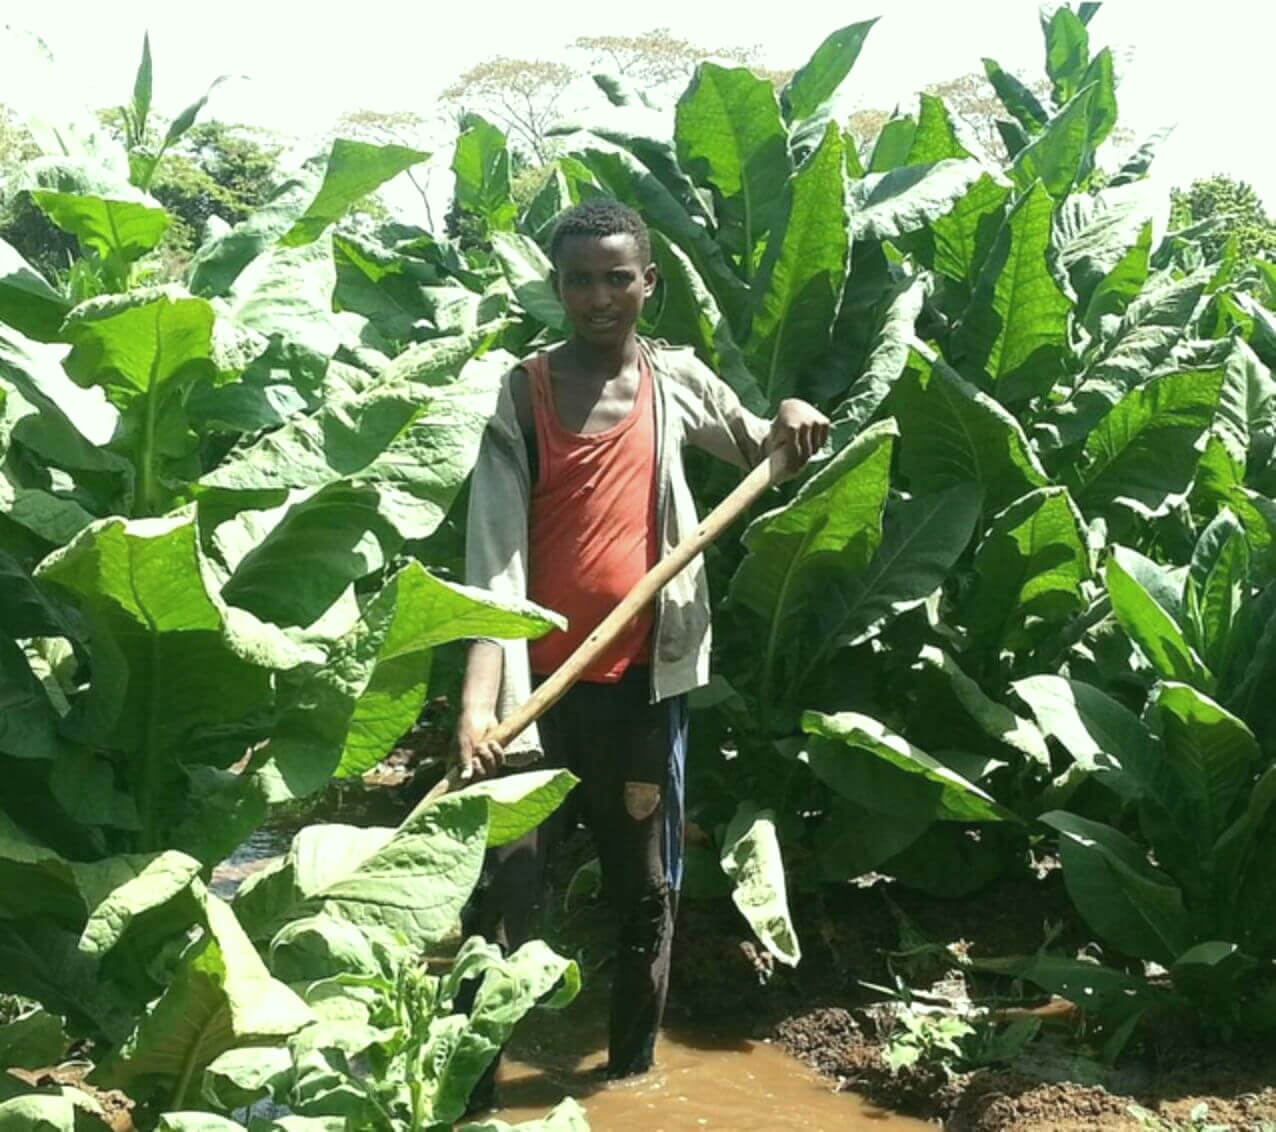 A captivating glimpse of a diligent tobacco farmer in Cameroon's verdant tobacco field